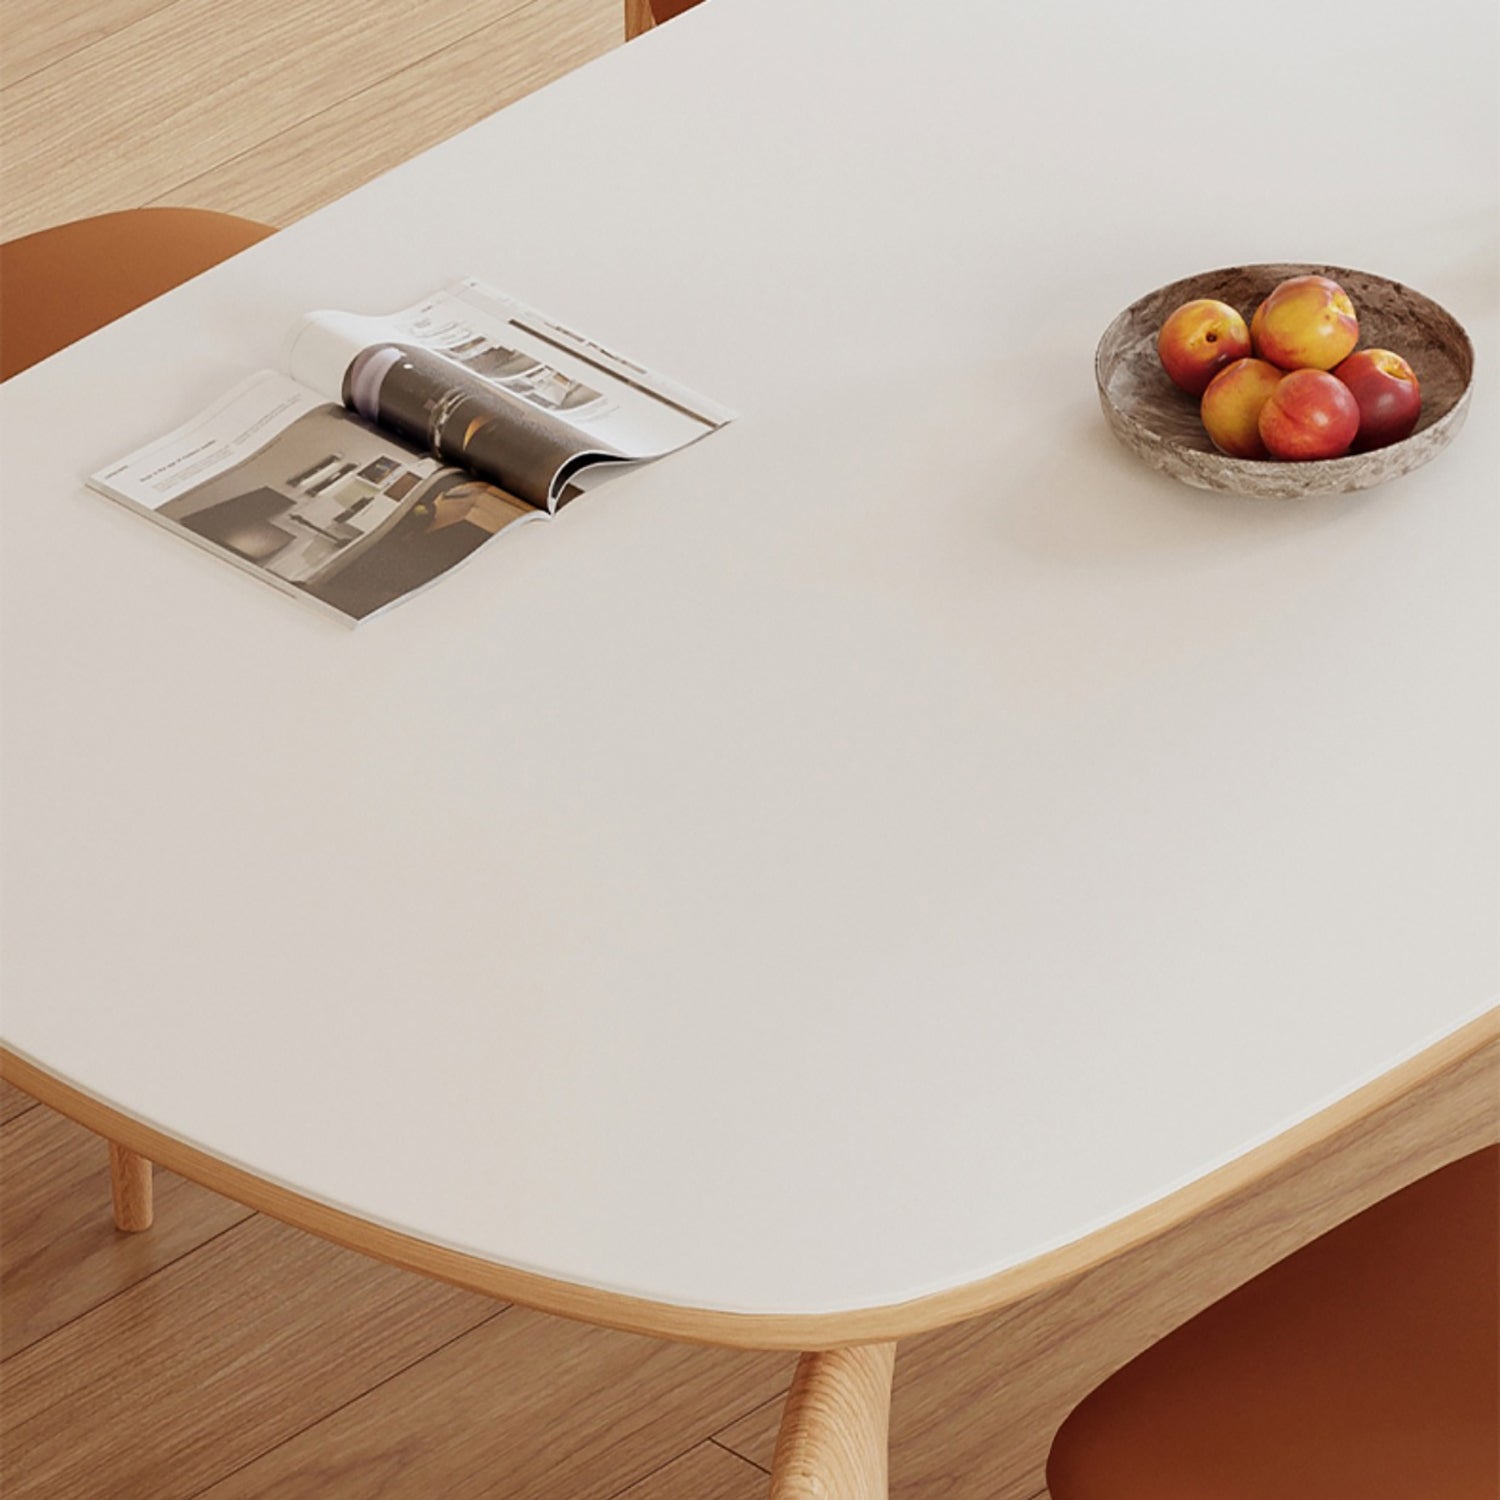 Everly Dining Table